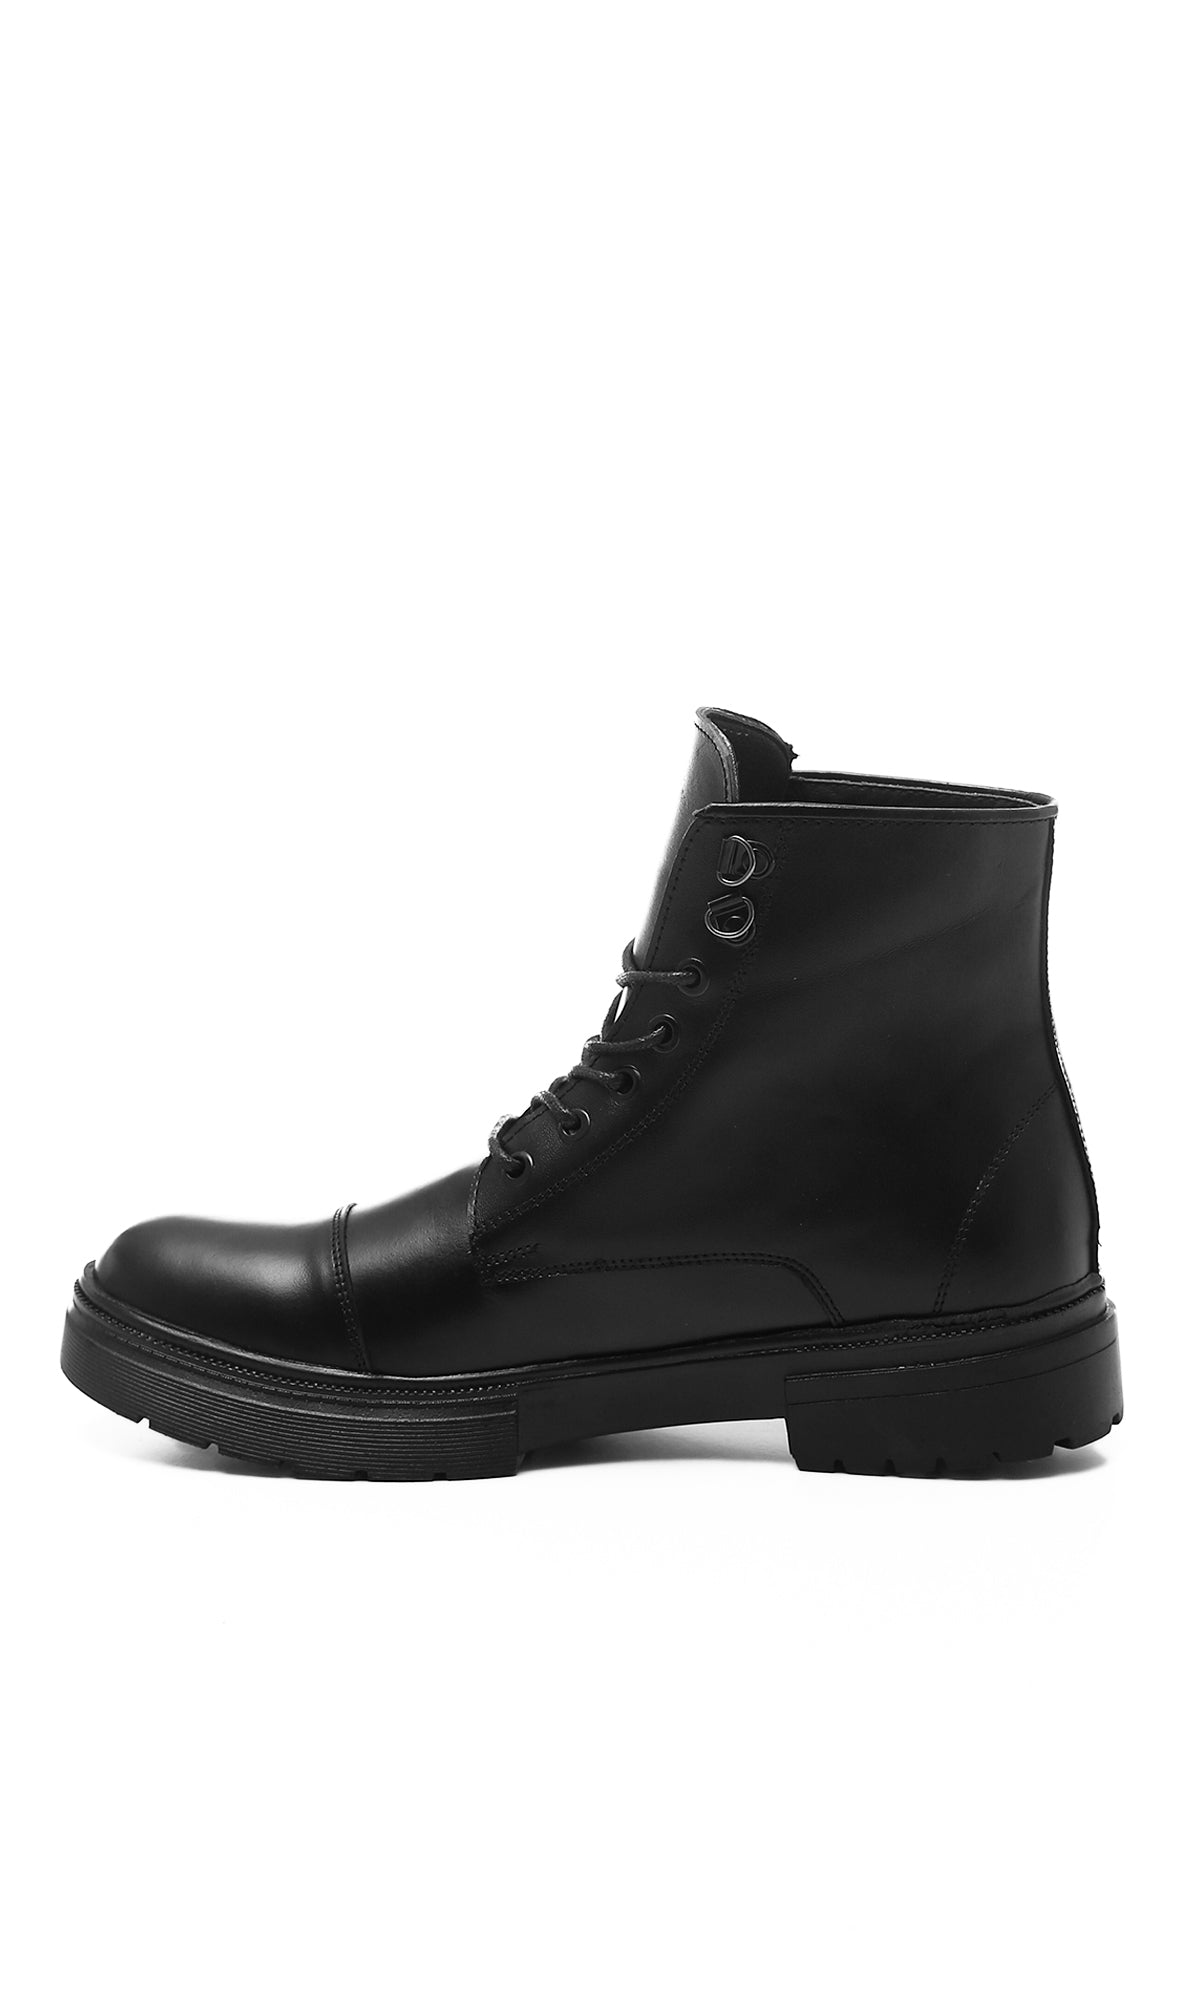 O176285 Lace Up Leather Boots With Oval Toecap - Black